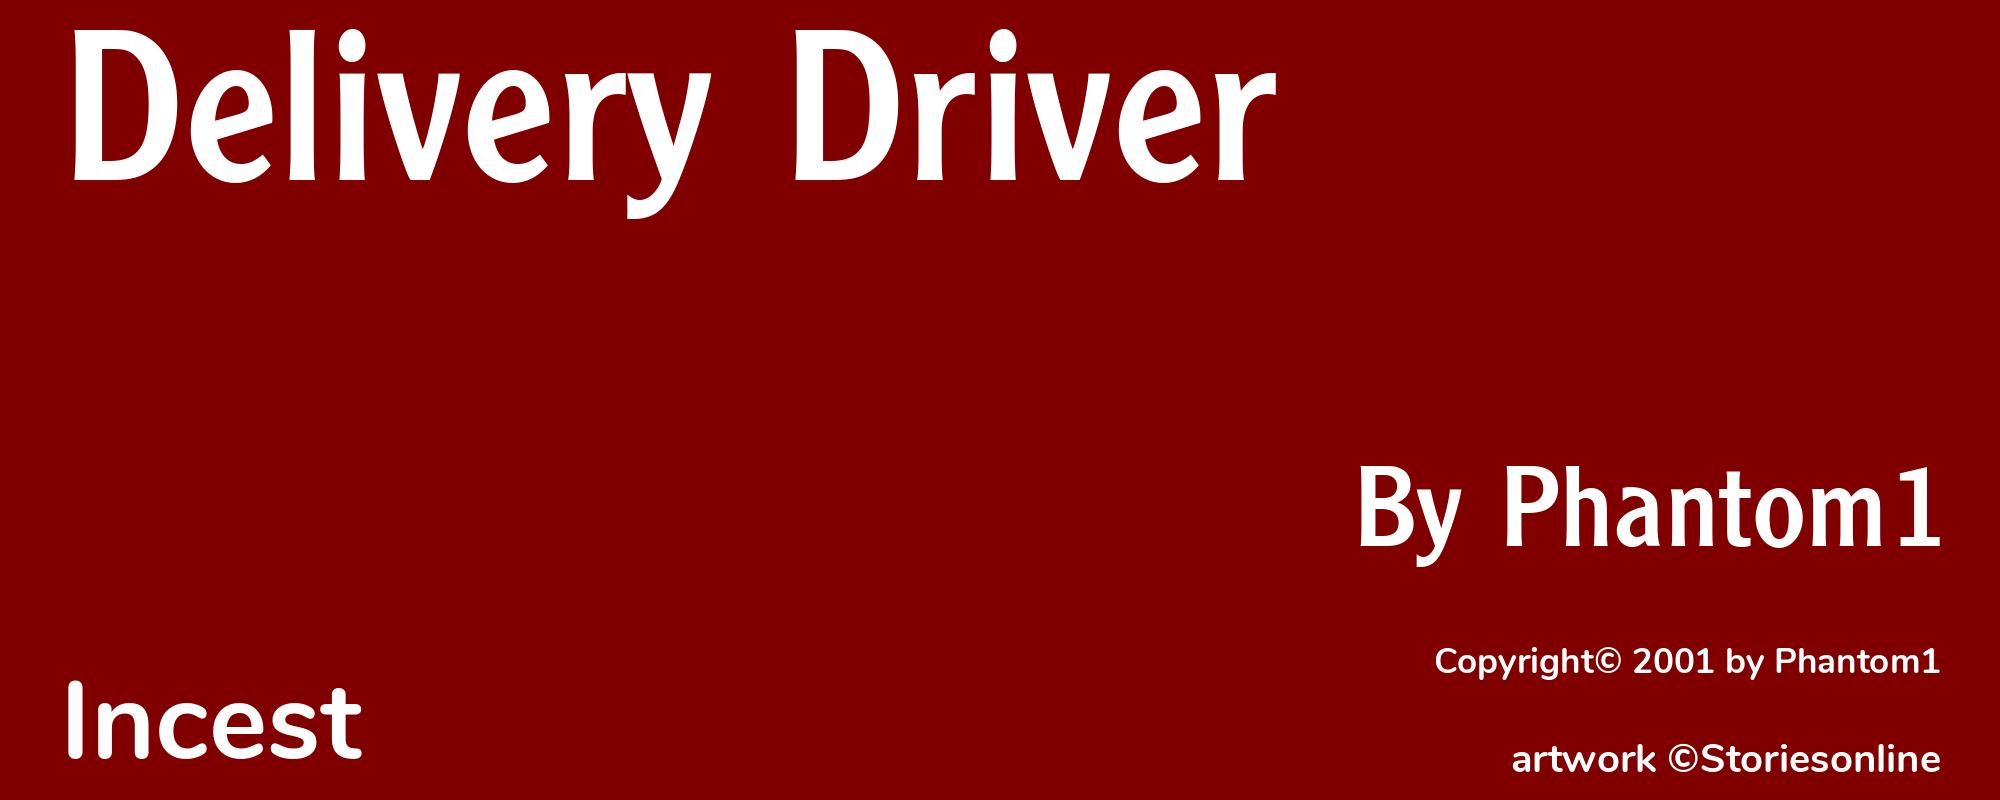 Delivery Driver - Cover